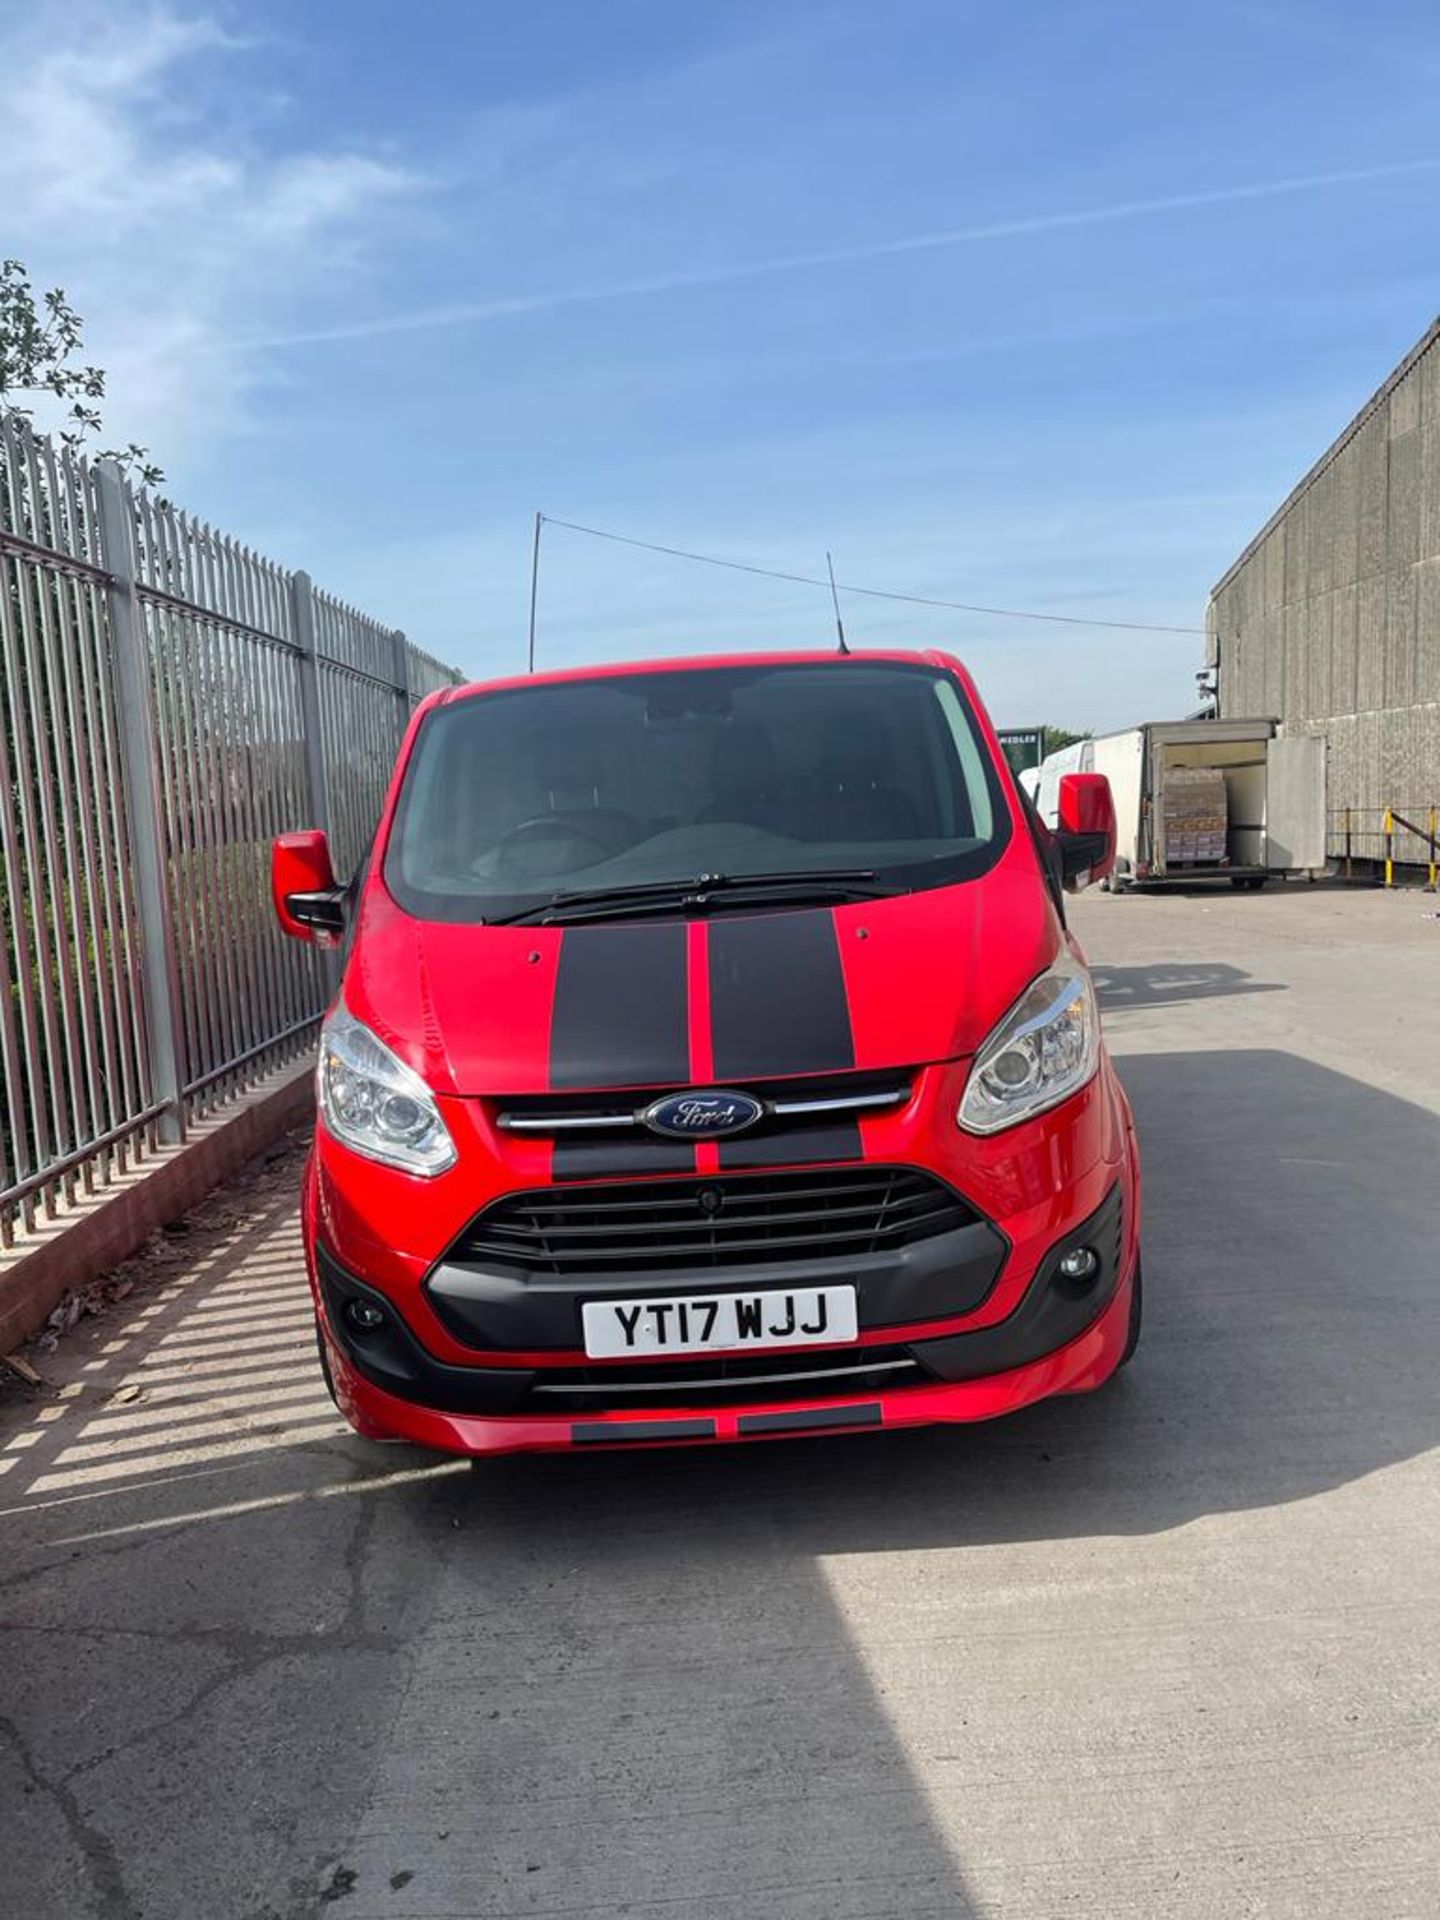 YT17 WJJ - FORD TRANSIT CUSTOM 290 L1 DIESEL FWD - 2.0 TDCi 170ps Low Roof Limited Van   Colour: Red - Image 3 of 7